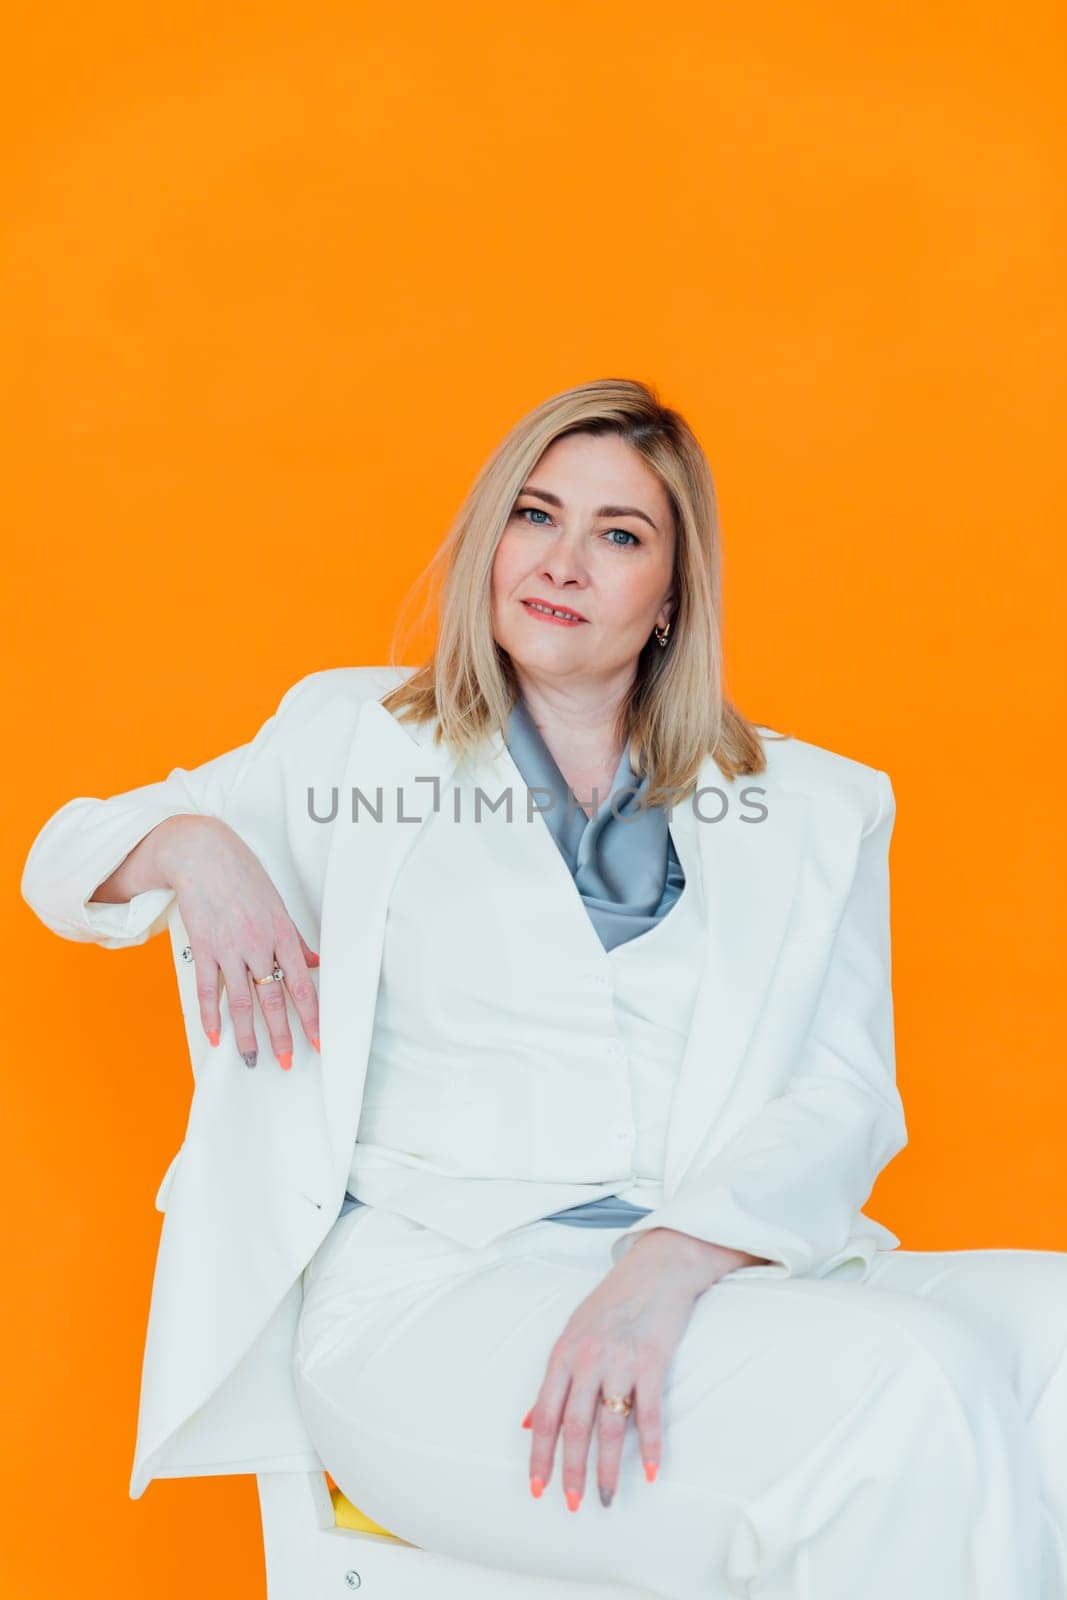 adult woman in white business suit in orange office